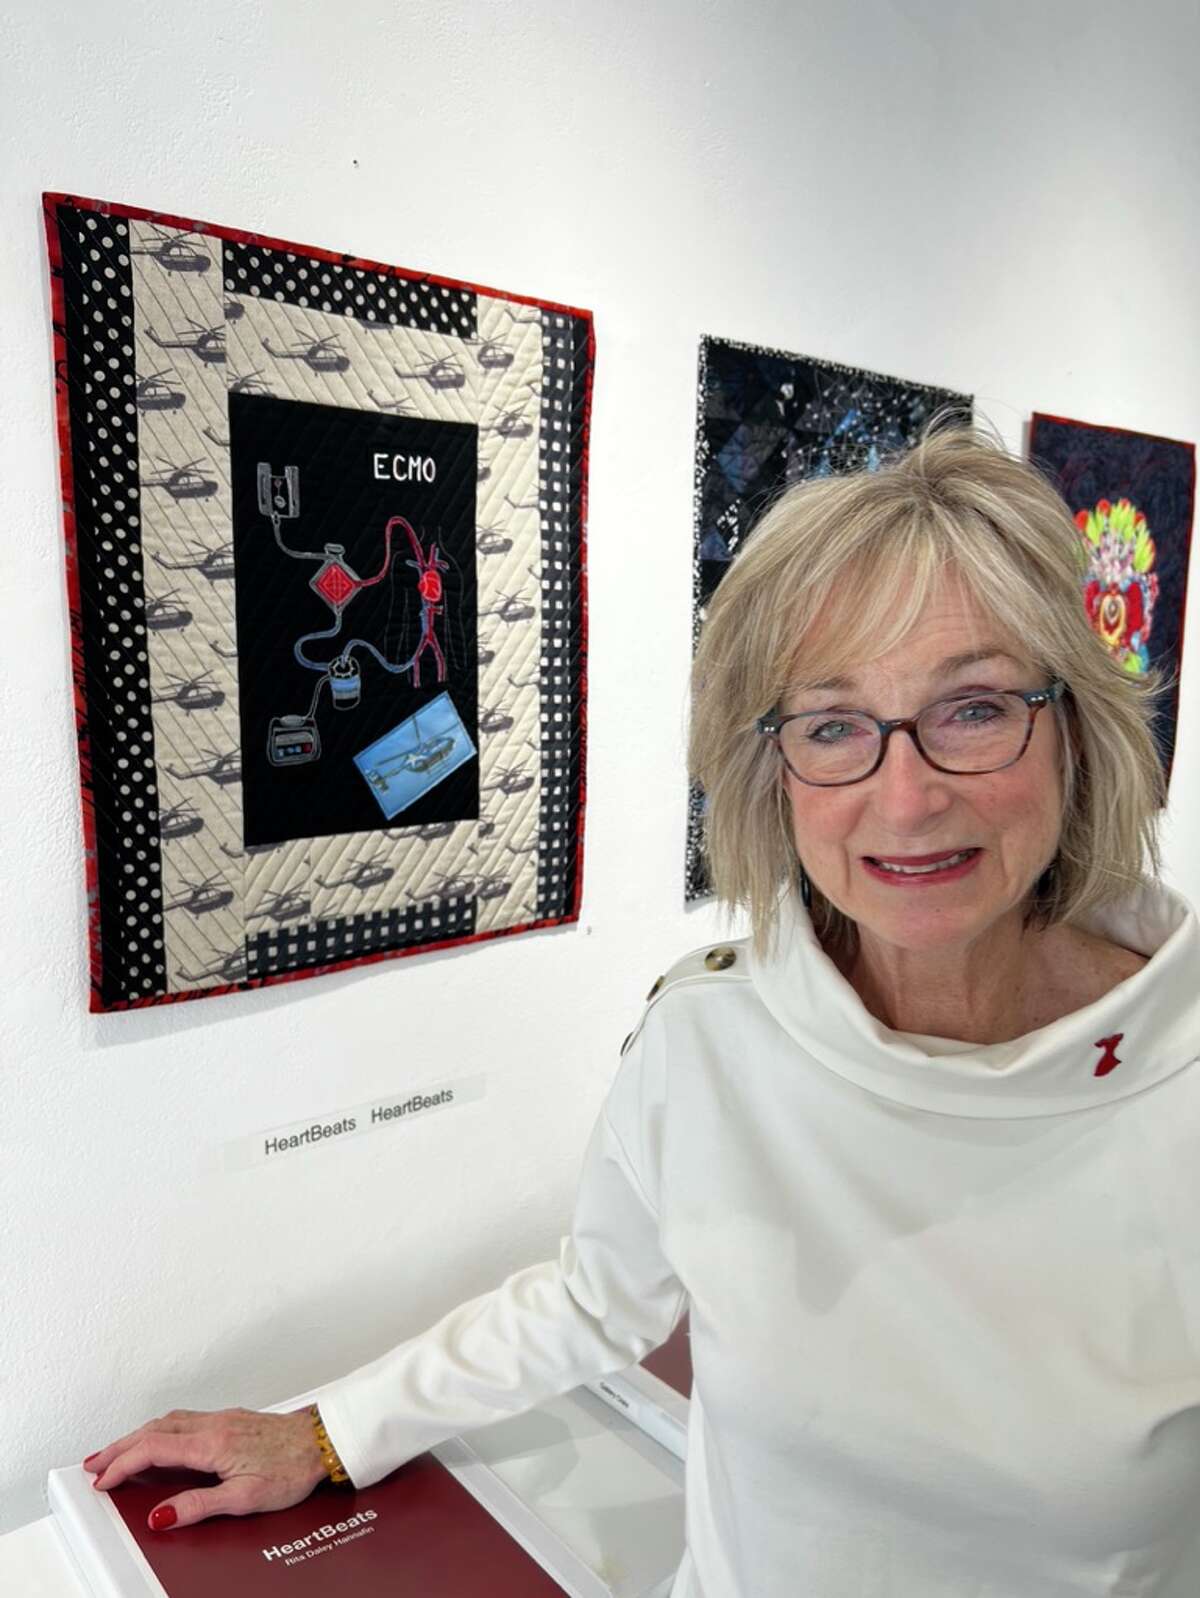 Rita Hannafin is an artist and has turned her experience into art, both to process it herself and share it with others. She just completed an opening at City Gallery in New Haven, part of which was a five-piece series called “HeartBeats.”